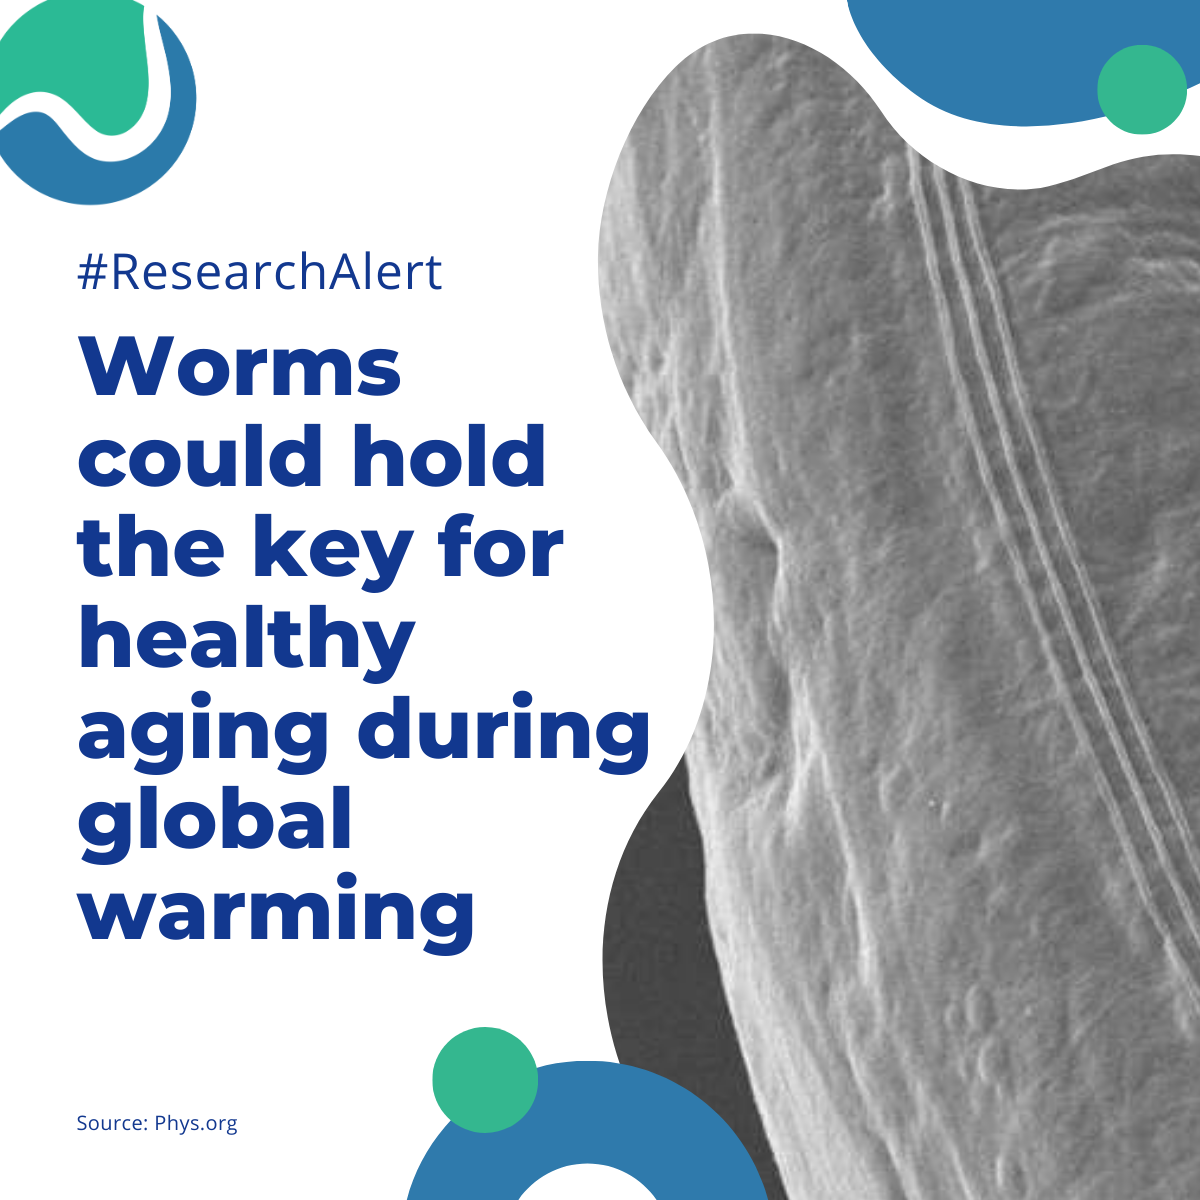 #ResearchAlert Worms could hold the key for healthy aging during global warming